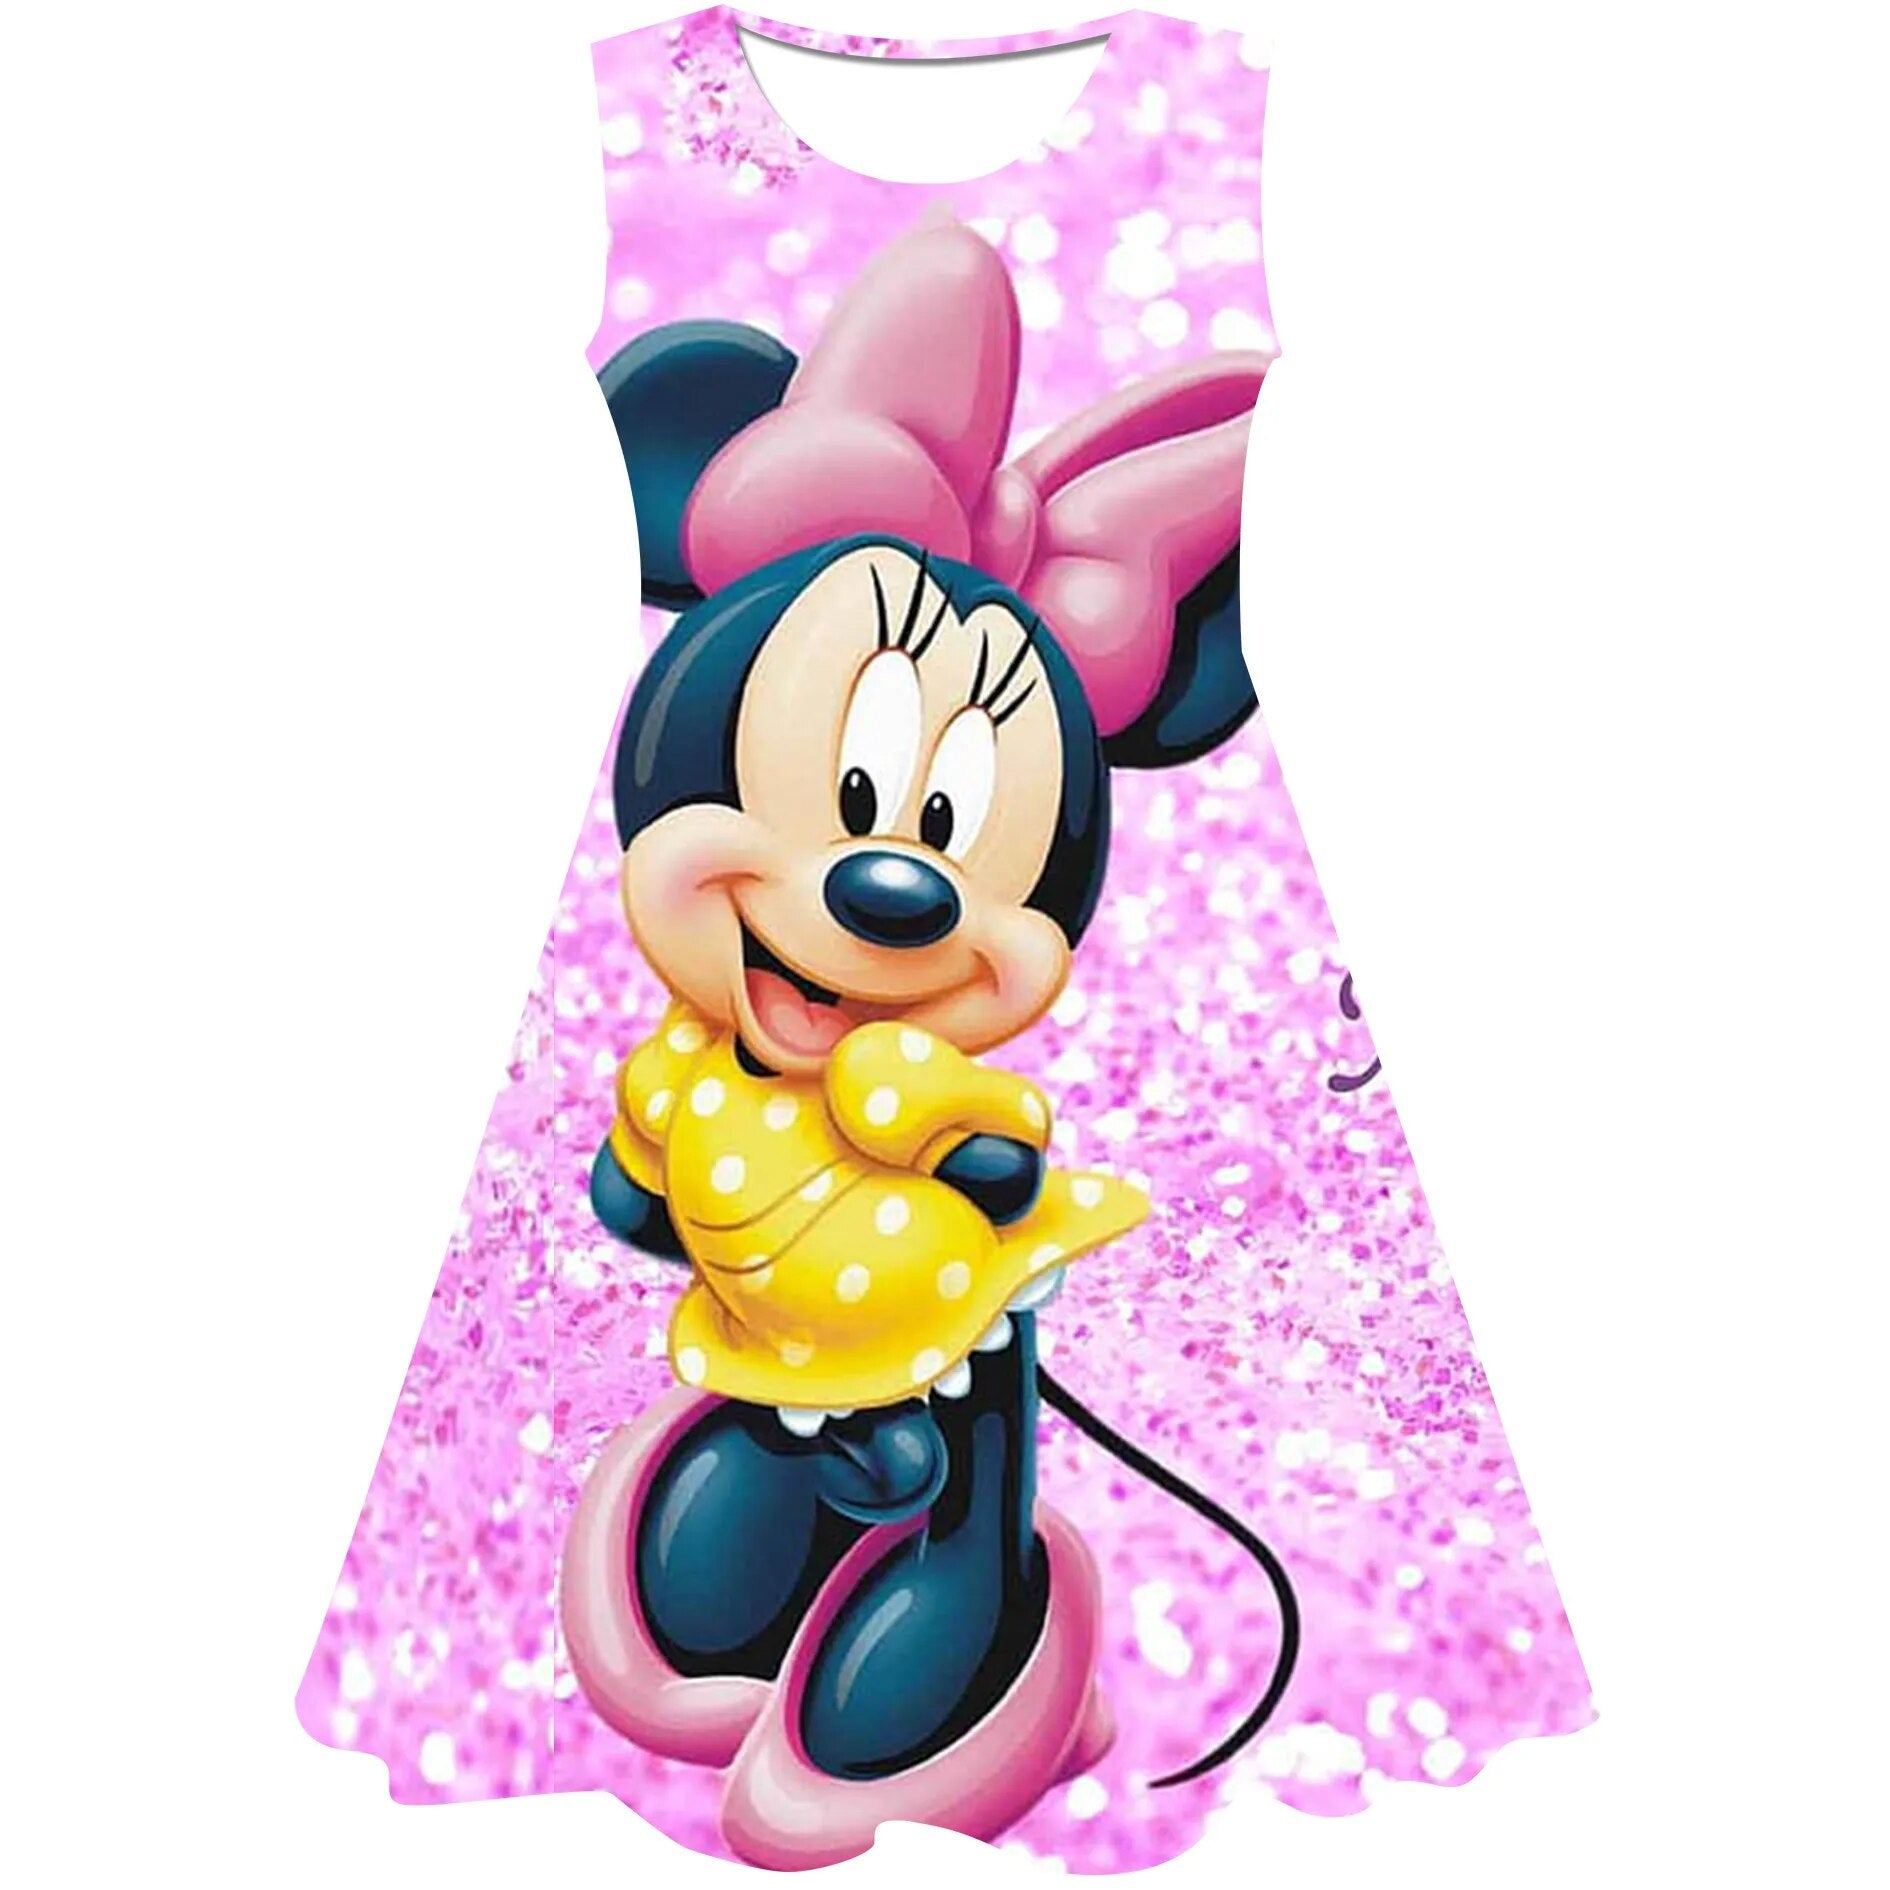 Minnie Mouse Dress Baby Girls Dresses Birthday Outfit Dresses Girl Costume For Kids Party Disney Series Skirt Clothes 1 10 Years - منصة بي مارت للتسوق الإلكترونيMinnie Mouse Dress Baby Girls Dresses Birthday Outfit Dresses Girl Costume For Kids Party Disney Series Skirt Clothes 1 10 Years